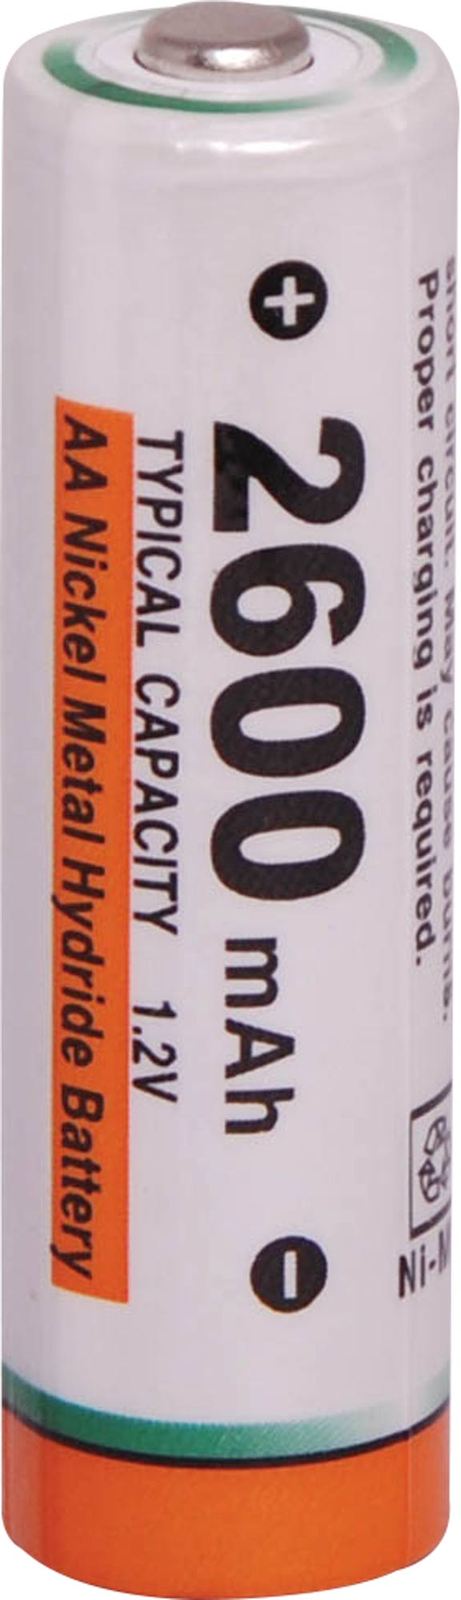 NexCell AA 2600mA NiMH Rechargeable Battery 4 pack